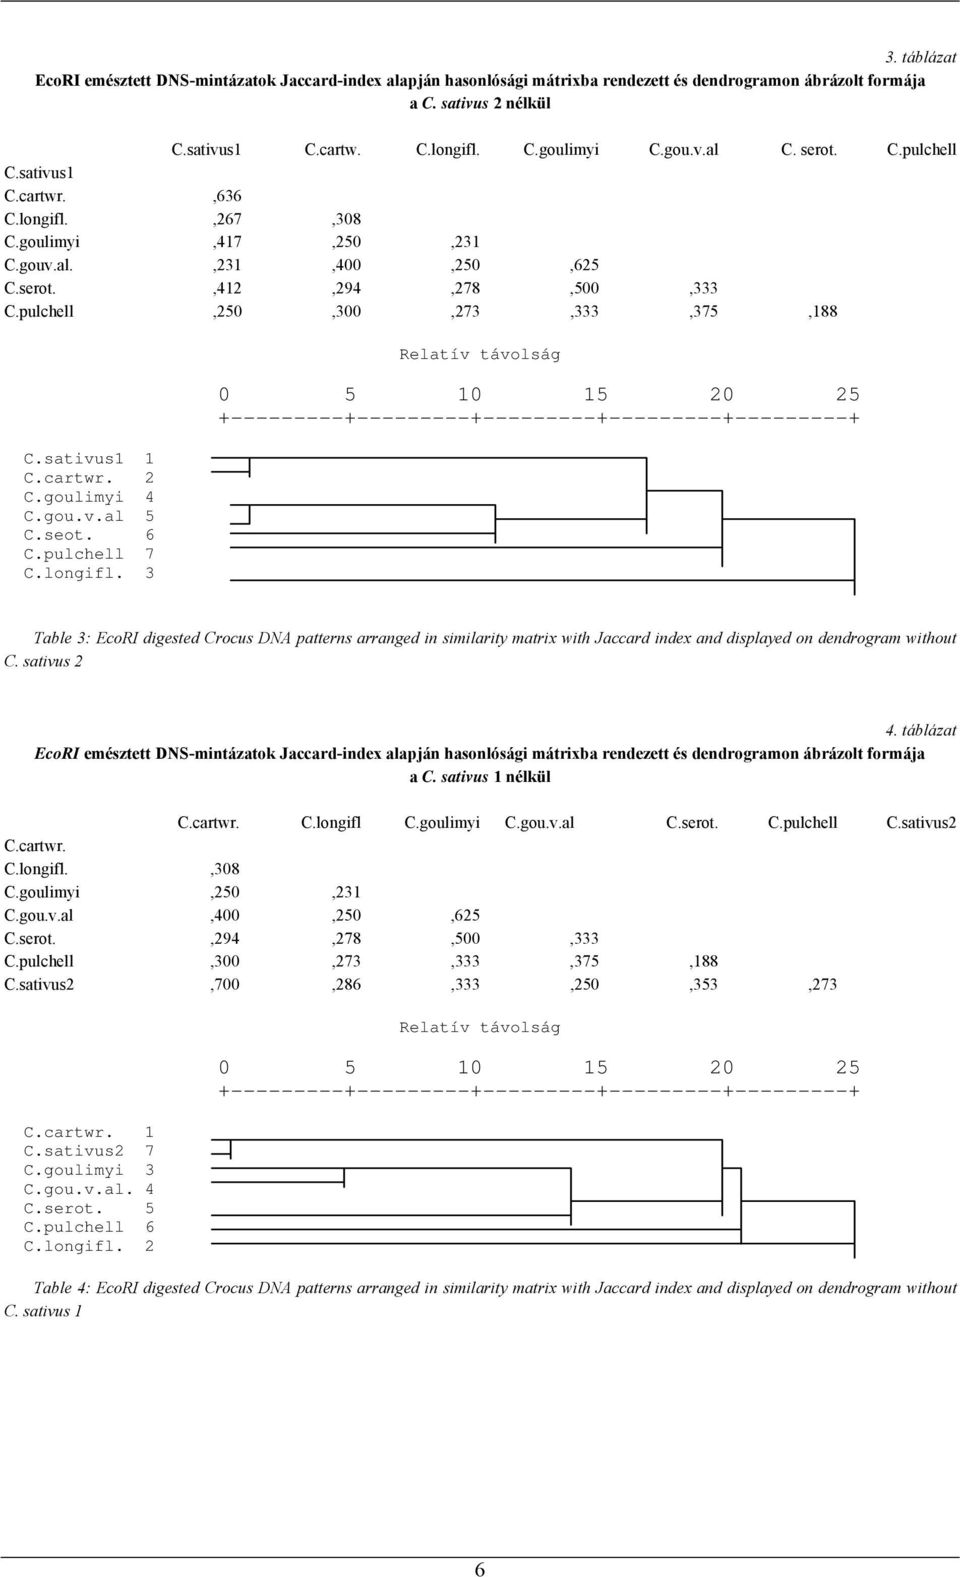 goulimyi 4 C.gou.v.al 5 C.seot. 6 C.pulchell 7 C.longifl. 3 Table 3: EcoRI digested Crocus DNA patterns arranged in similarity matrix with Jaccard index and displayed on dendrogram without C.